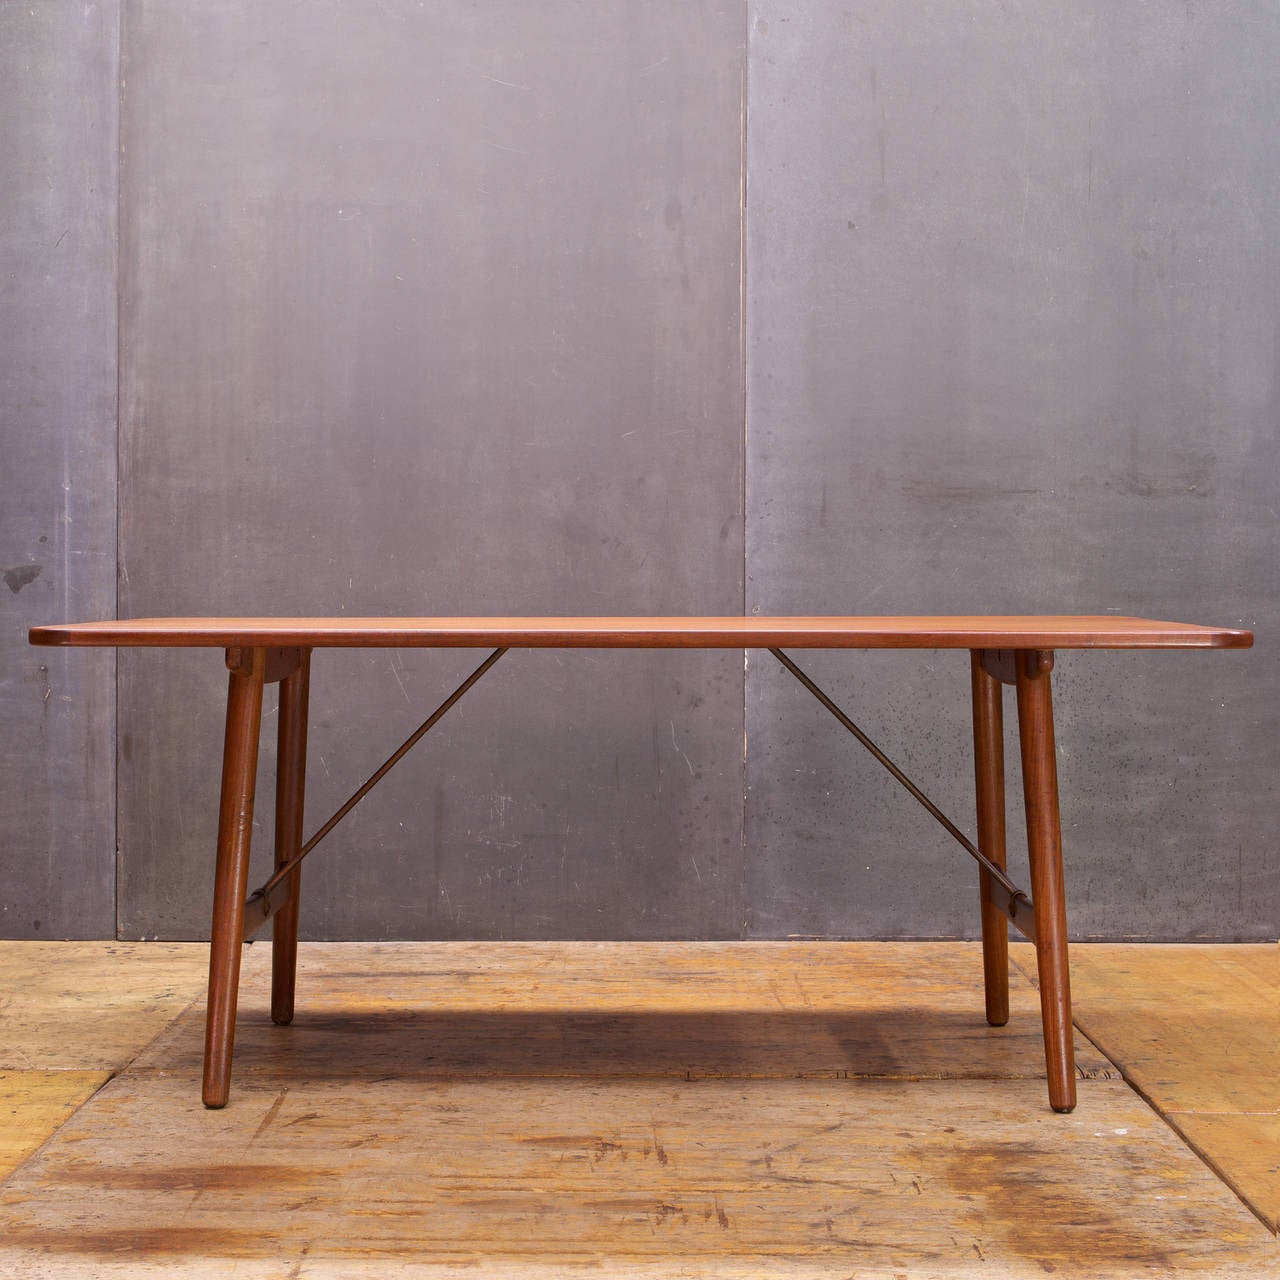 Rarely seen design in the states, a large work surface.

W: 71 x H: 35½ in.